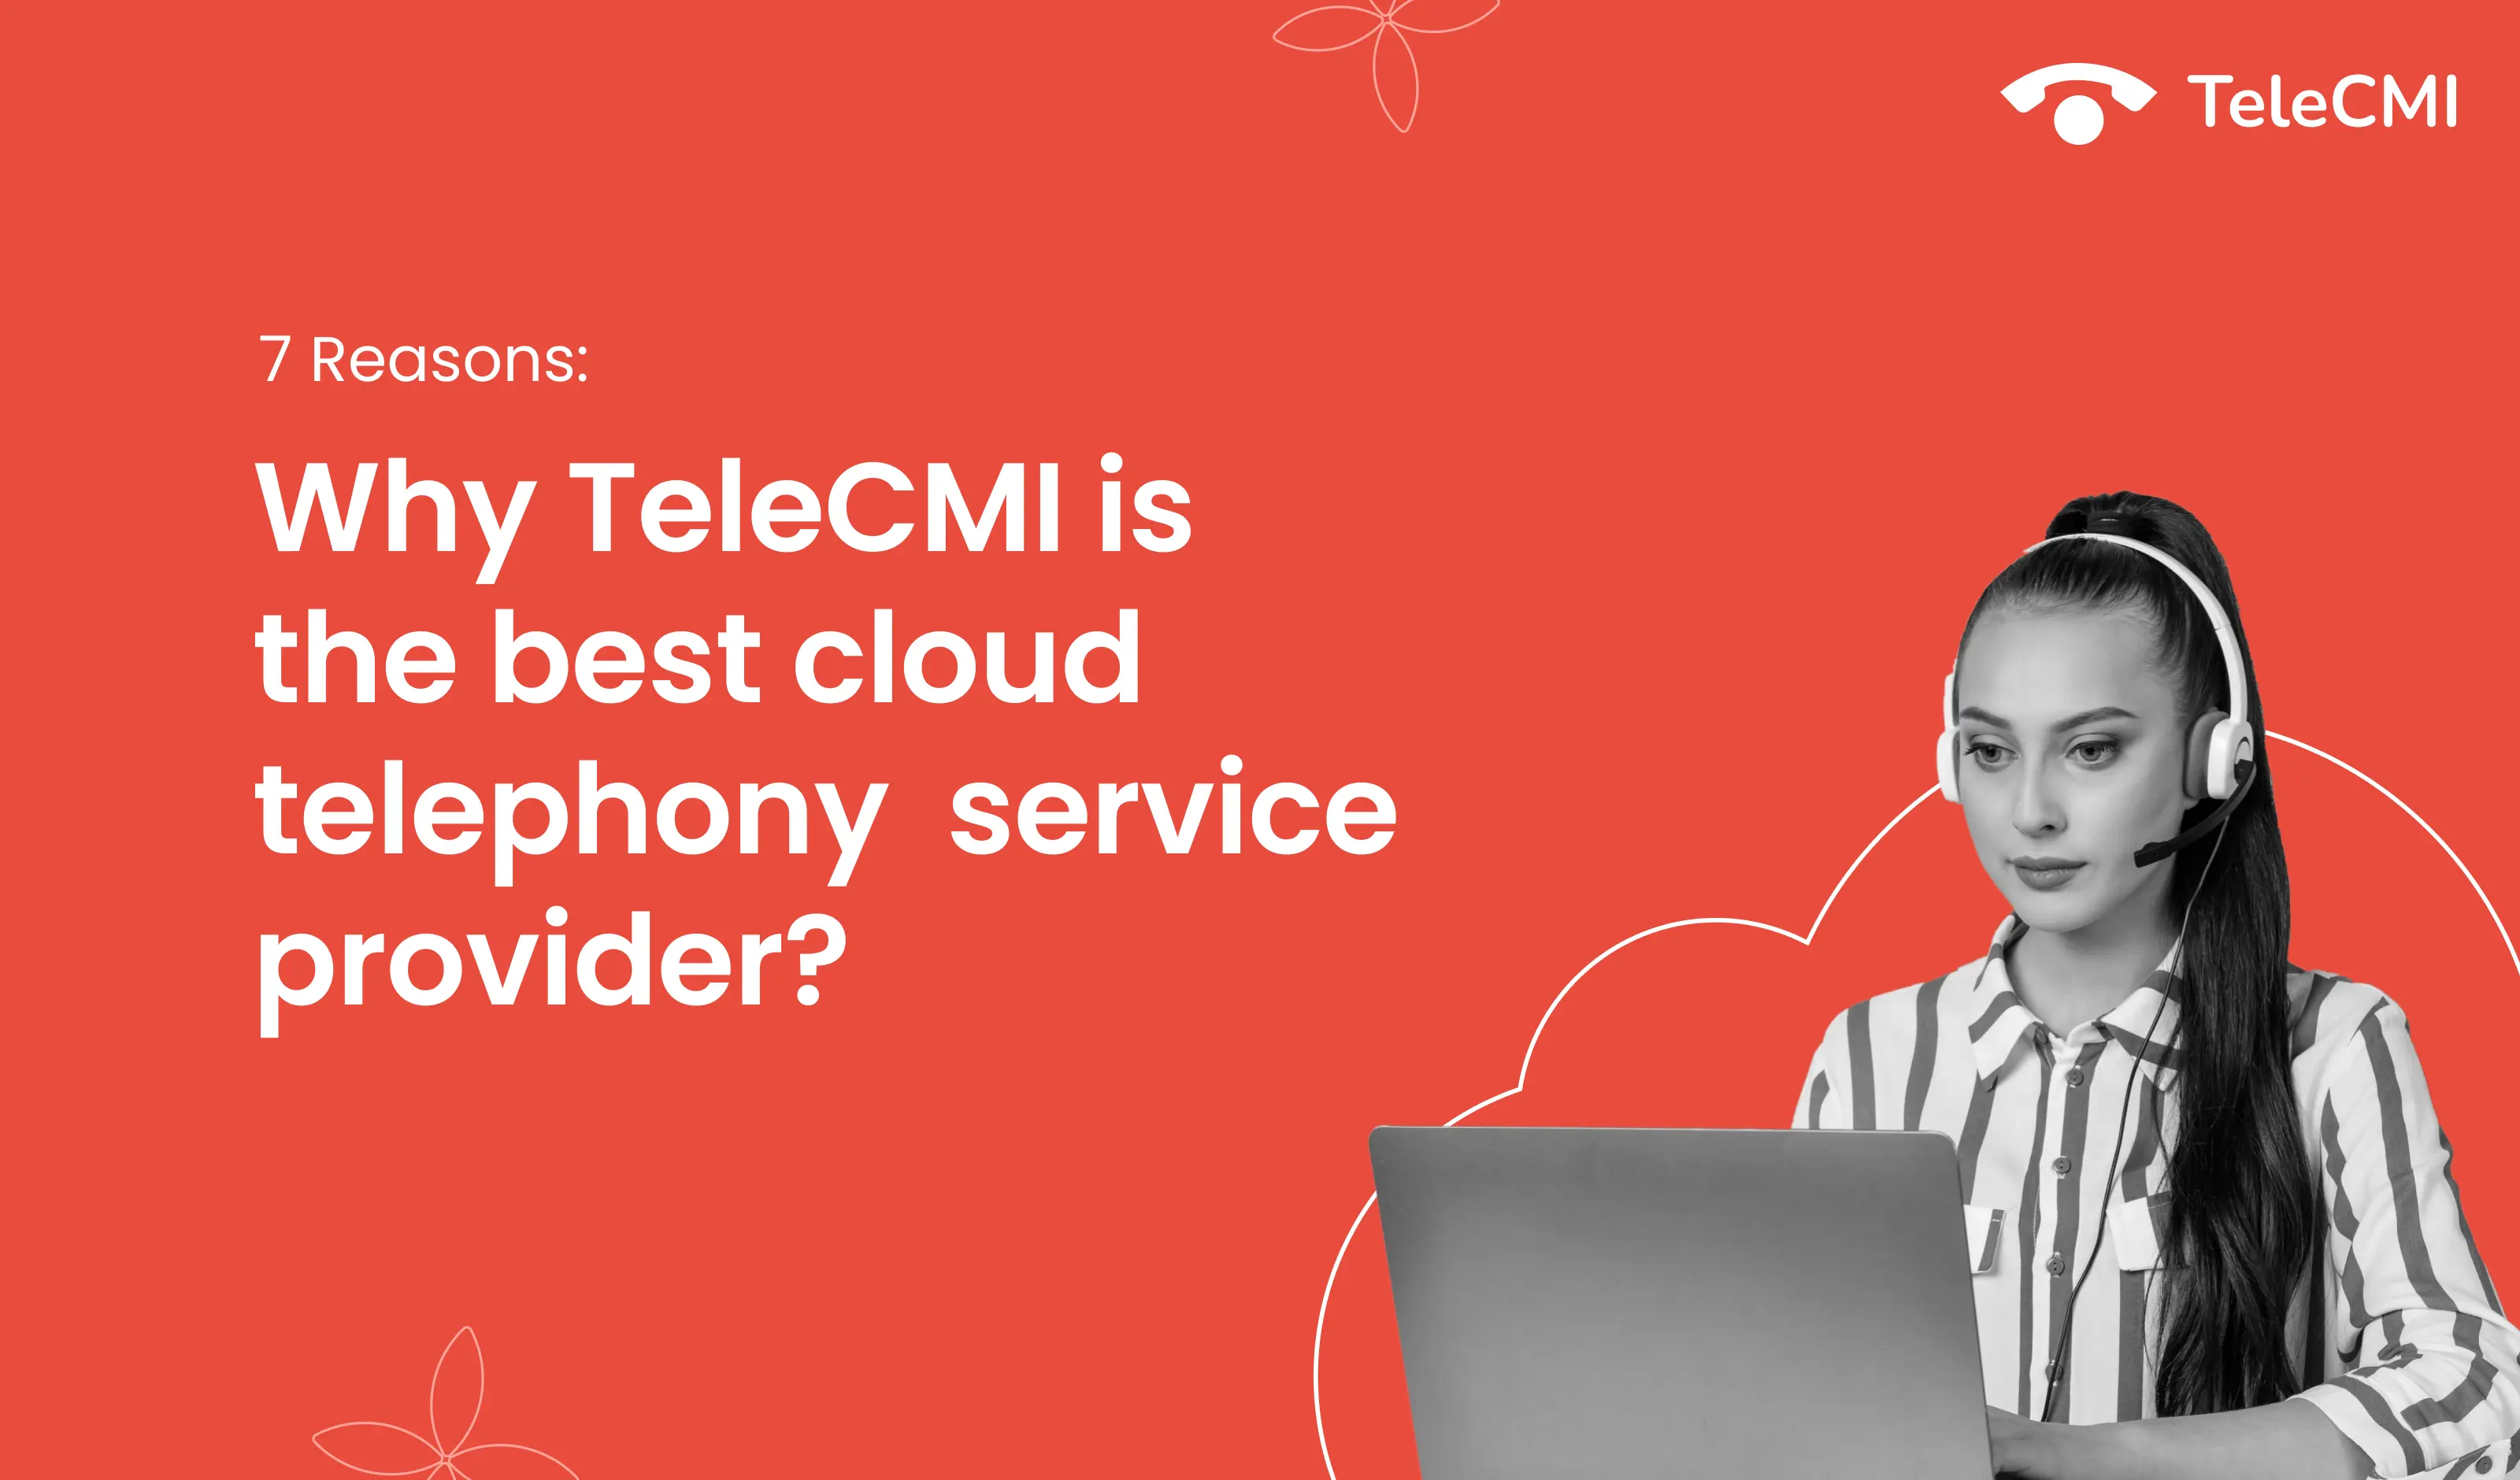 Top 7 Reasons Why TeleCMI is the Best Cloud Telephony Service Provider for Businesses in India